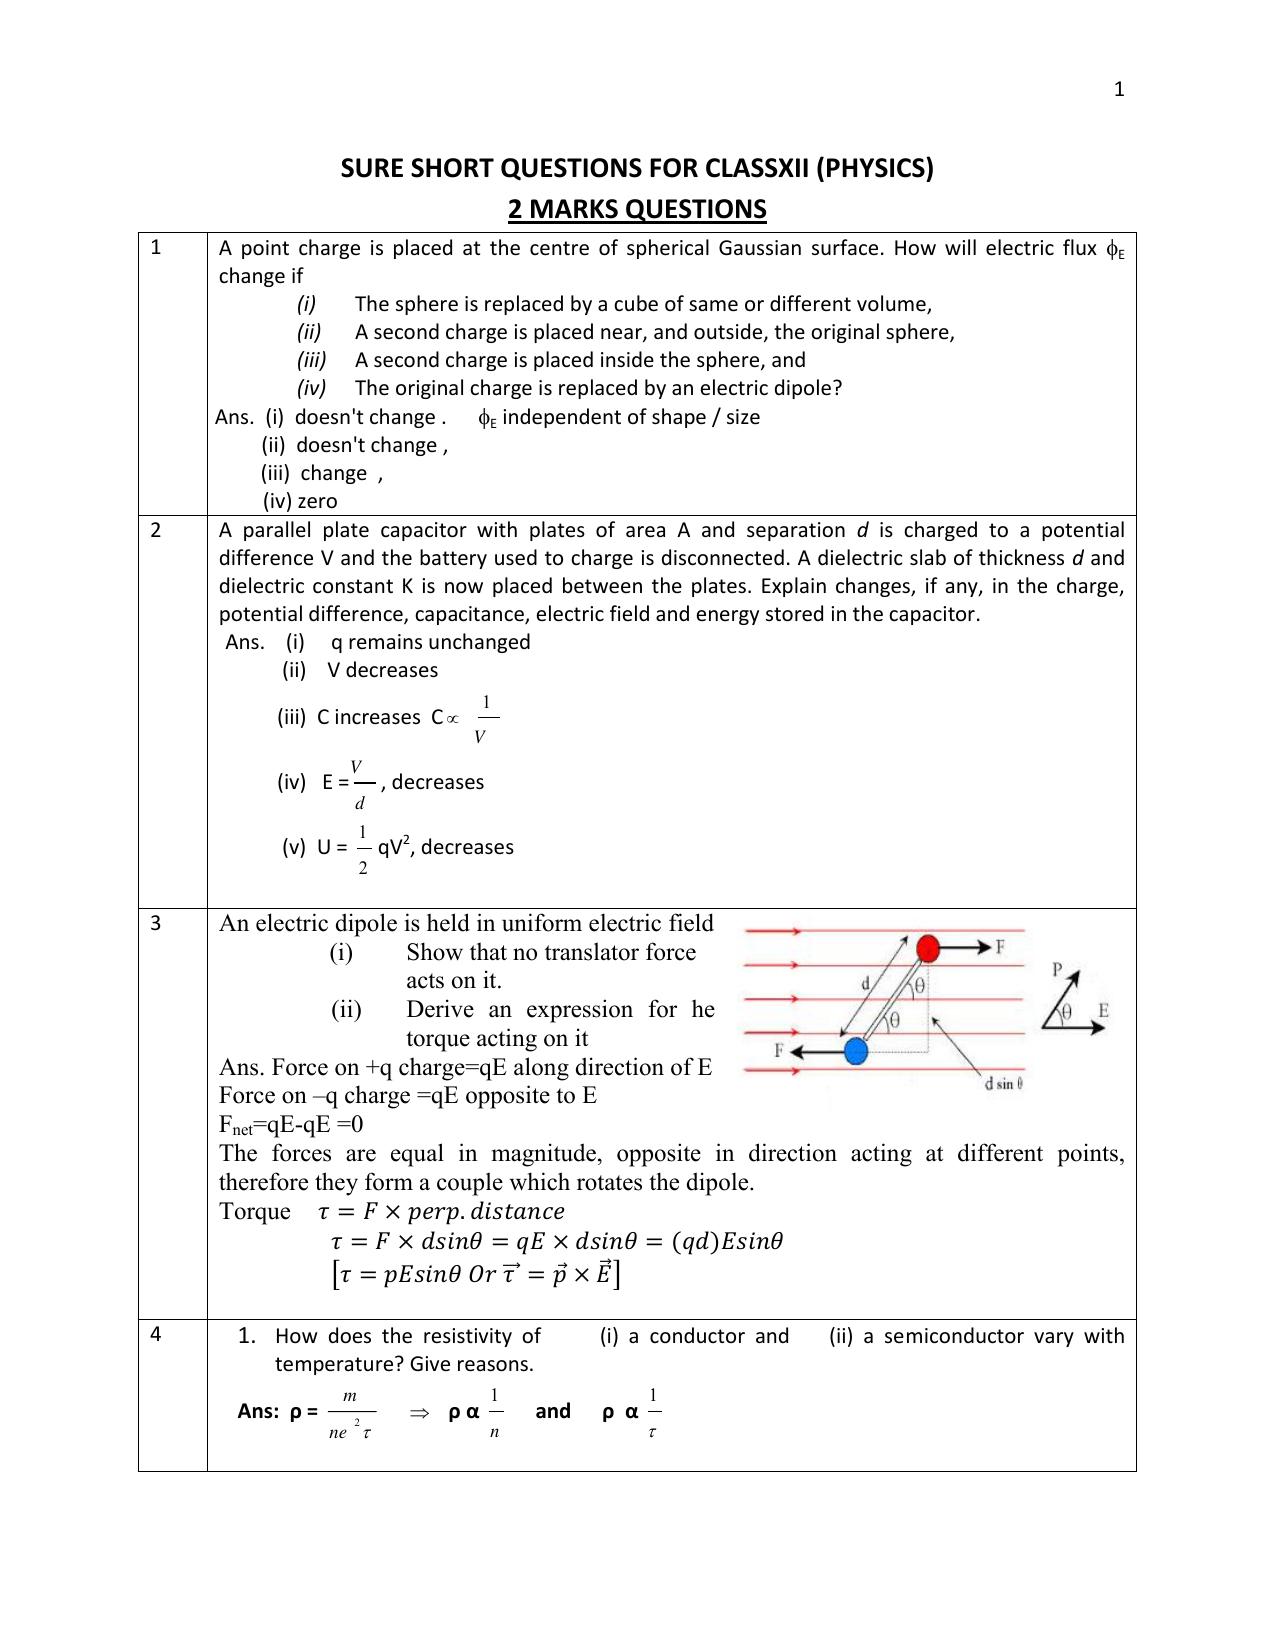 CBSE Class 12 Physics 1 mark Question Bank - 2 MARKS QUESTIONS - Page 1